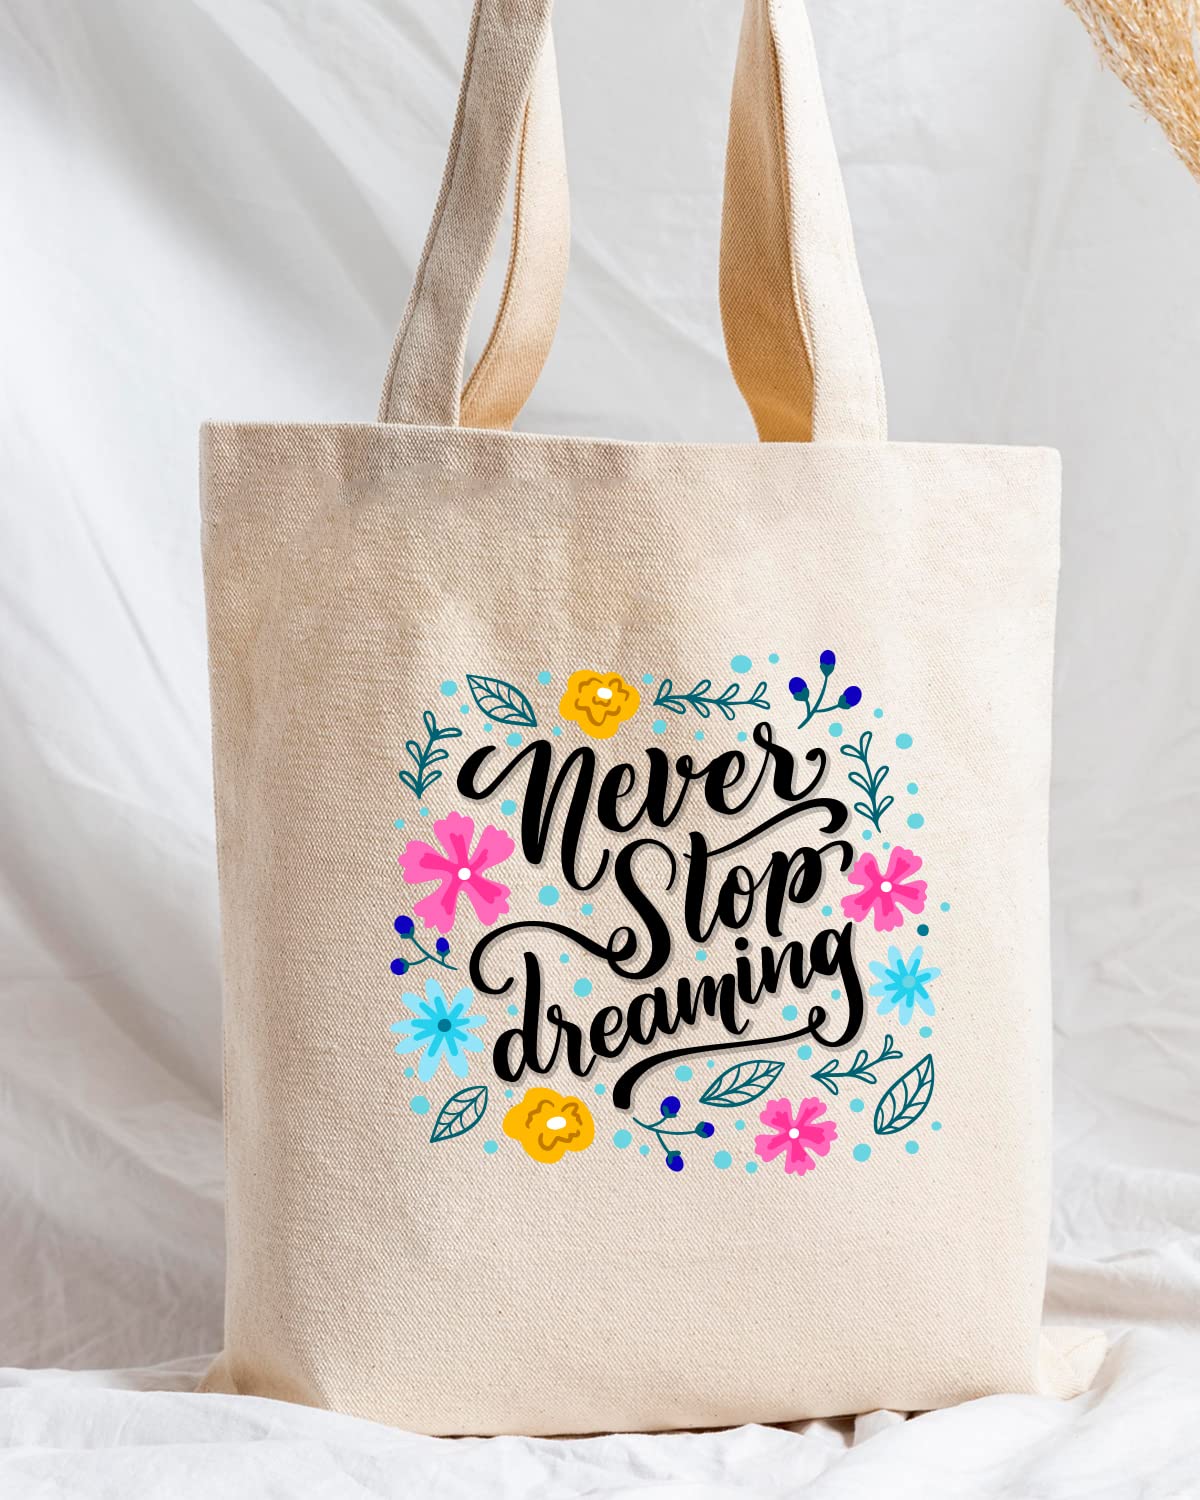 The Pink Magnet Never Stop Dreaming Tote Bag - Canvas Tote Bag for Women | Printed Multipurpose Cotton Bags | Cute Hand Bag for Girls | Best for College, Travel, Grocery | Reusable Shopping Bag | Eco-Friendly Tote Bag